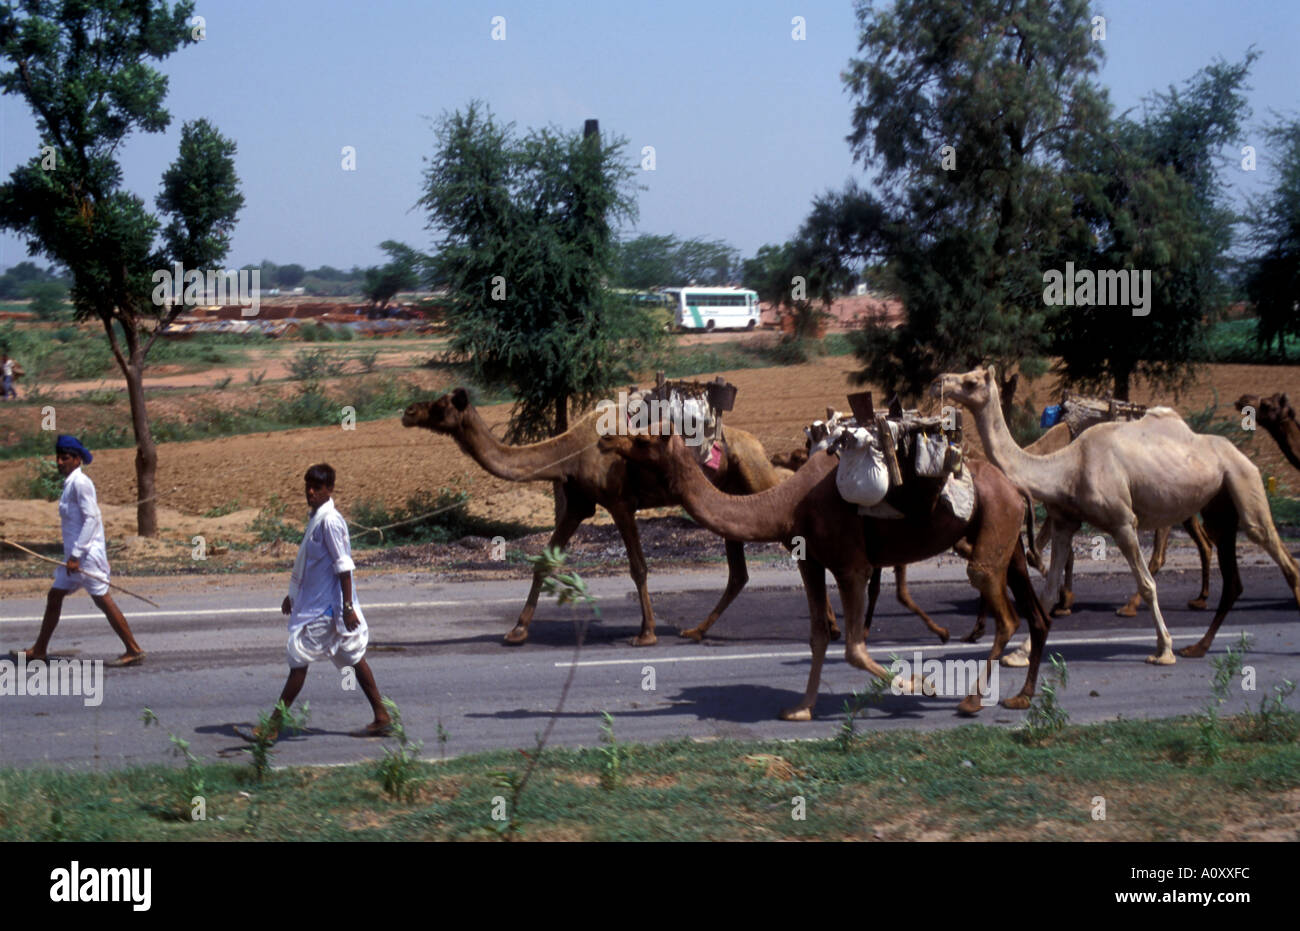 A Camel train or caravan on a rural road in India Stock Photo